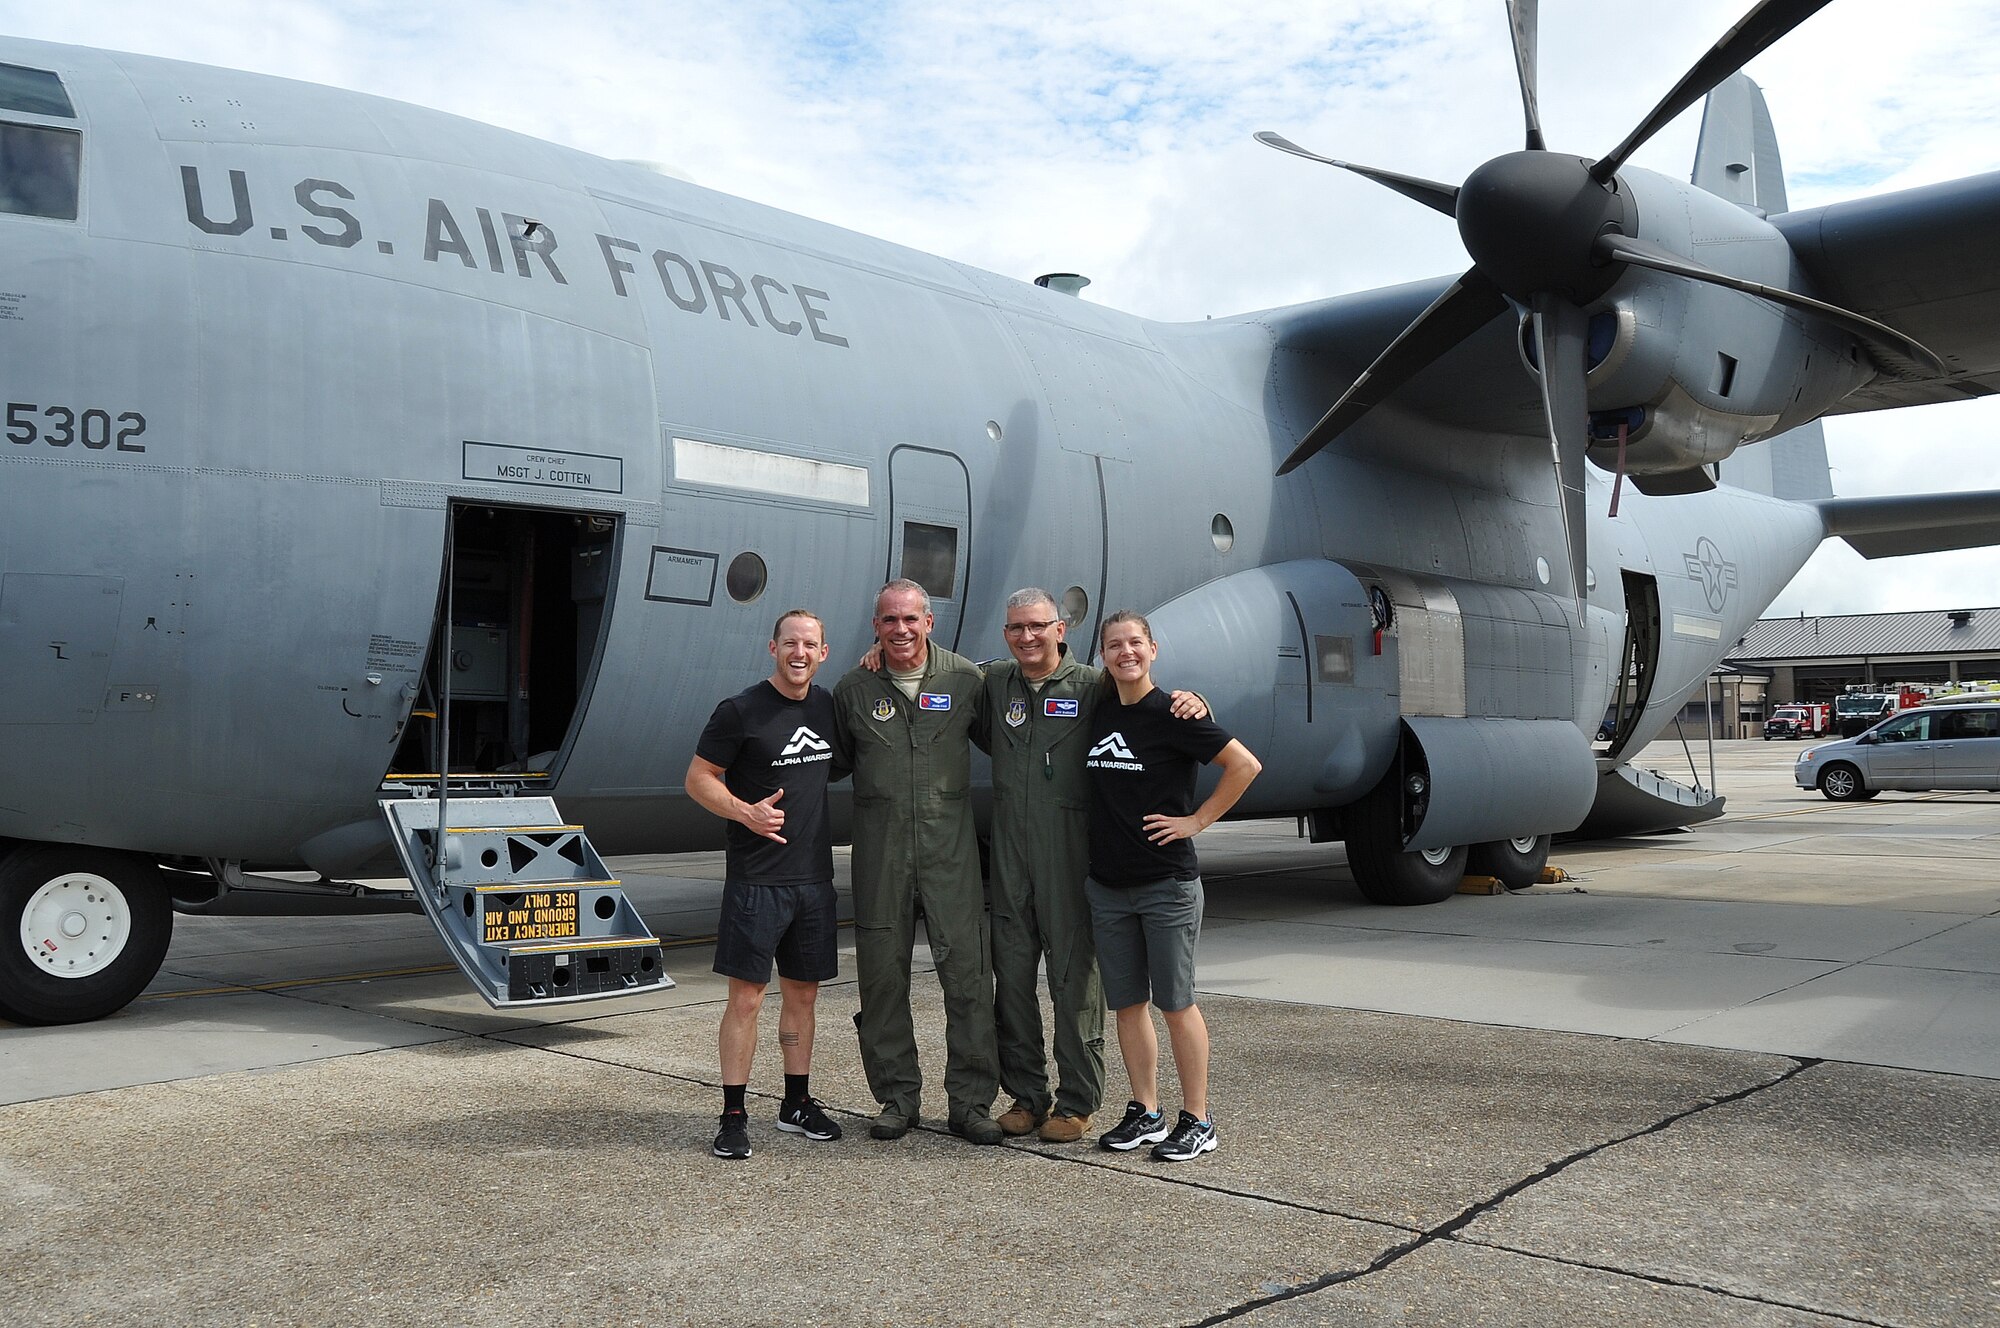 Kevin Klein and Sara Heesen, American Ninja Warriors, were briefed on the hurricane mission and toured a WC-130J of the 53rd Weather Reconnaissance Squadron, 403rd Wing, during the Alpha Warrior tour at Keesler Air Force Base, Mississippi Aug. 2, 2018. Alpha Warrior, built around a unique apparatus, challenges Airmen as they tackle the various obstacles or stations. This program is designed to enhance fitness training by helping Airmen build and maintain resiliency, while at home or deployed. (US. Air
Force photo by Master Sgt. Jessica Kendziorek)